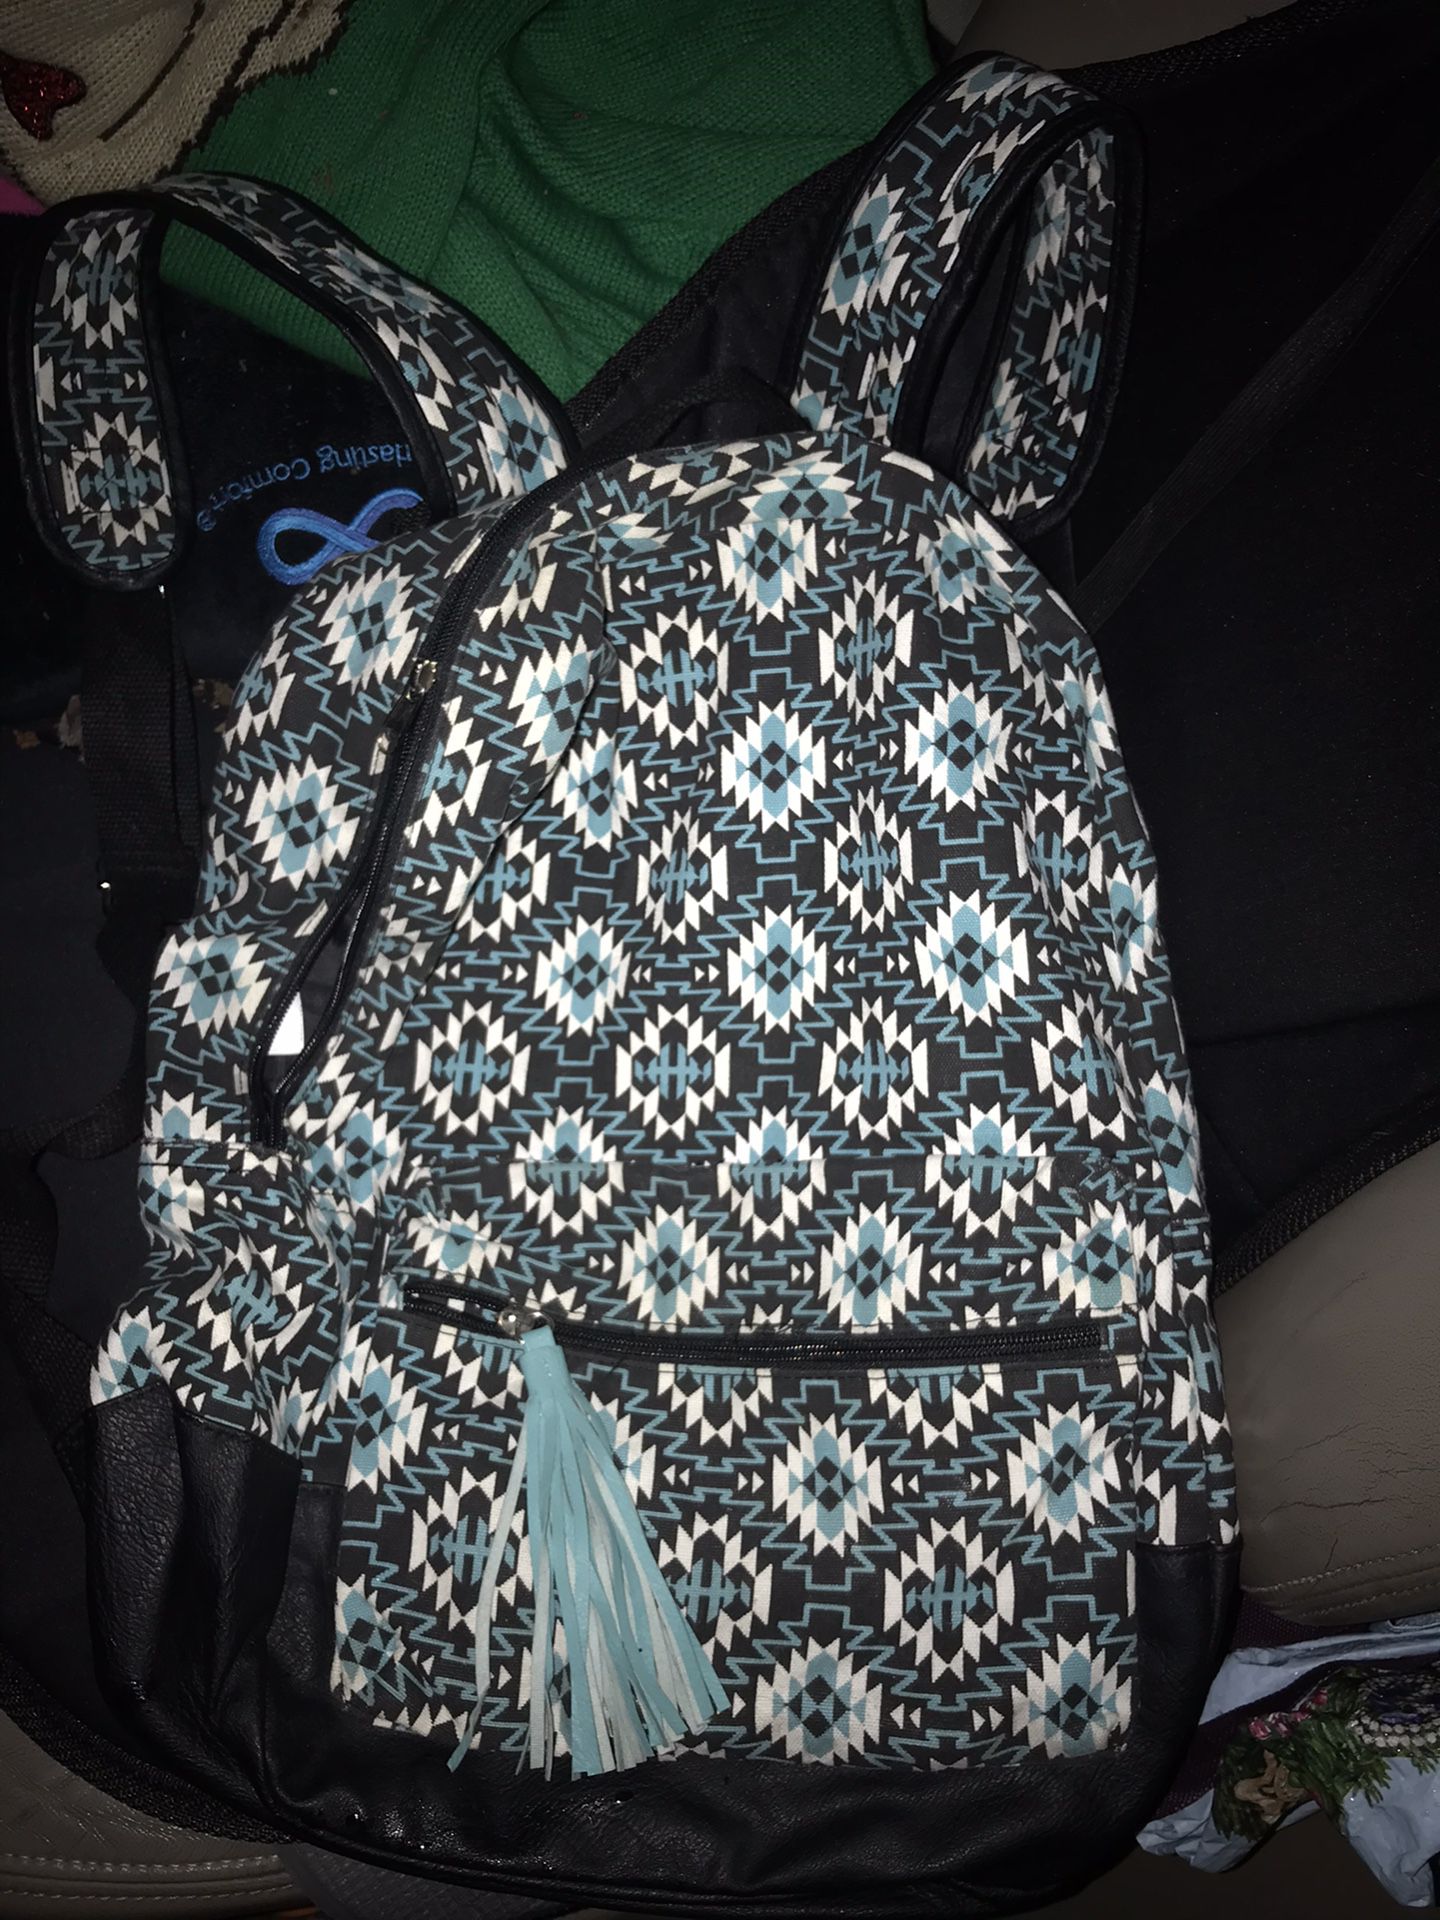 Very Nice Large Backpack Only $20